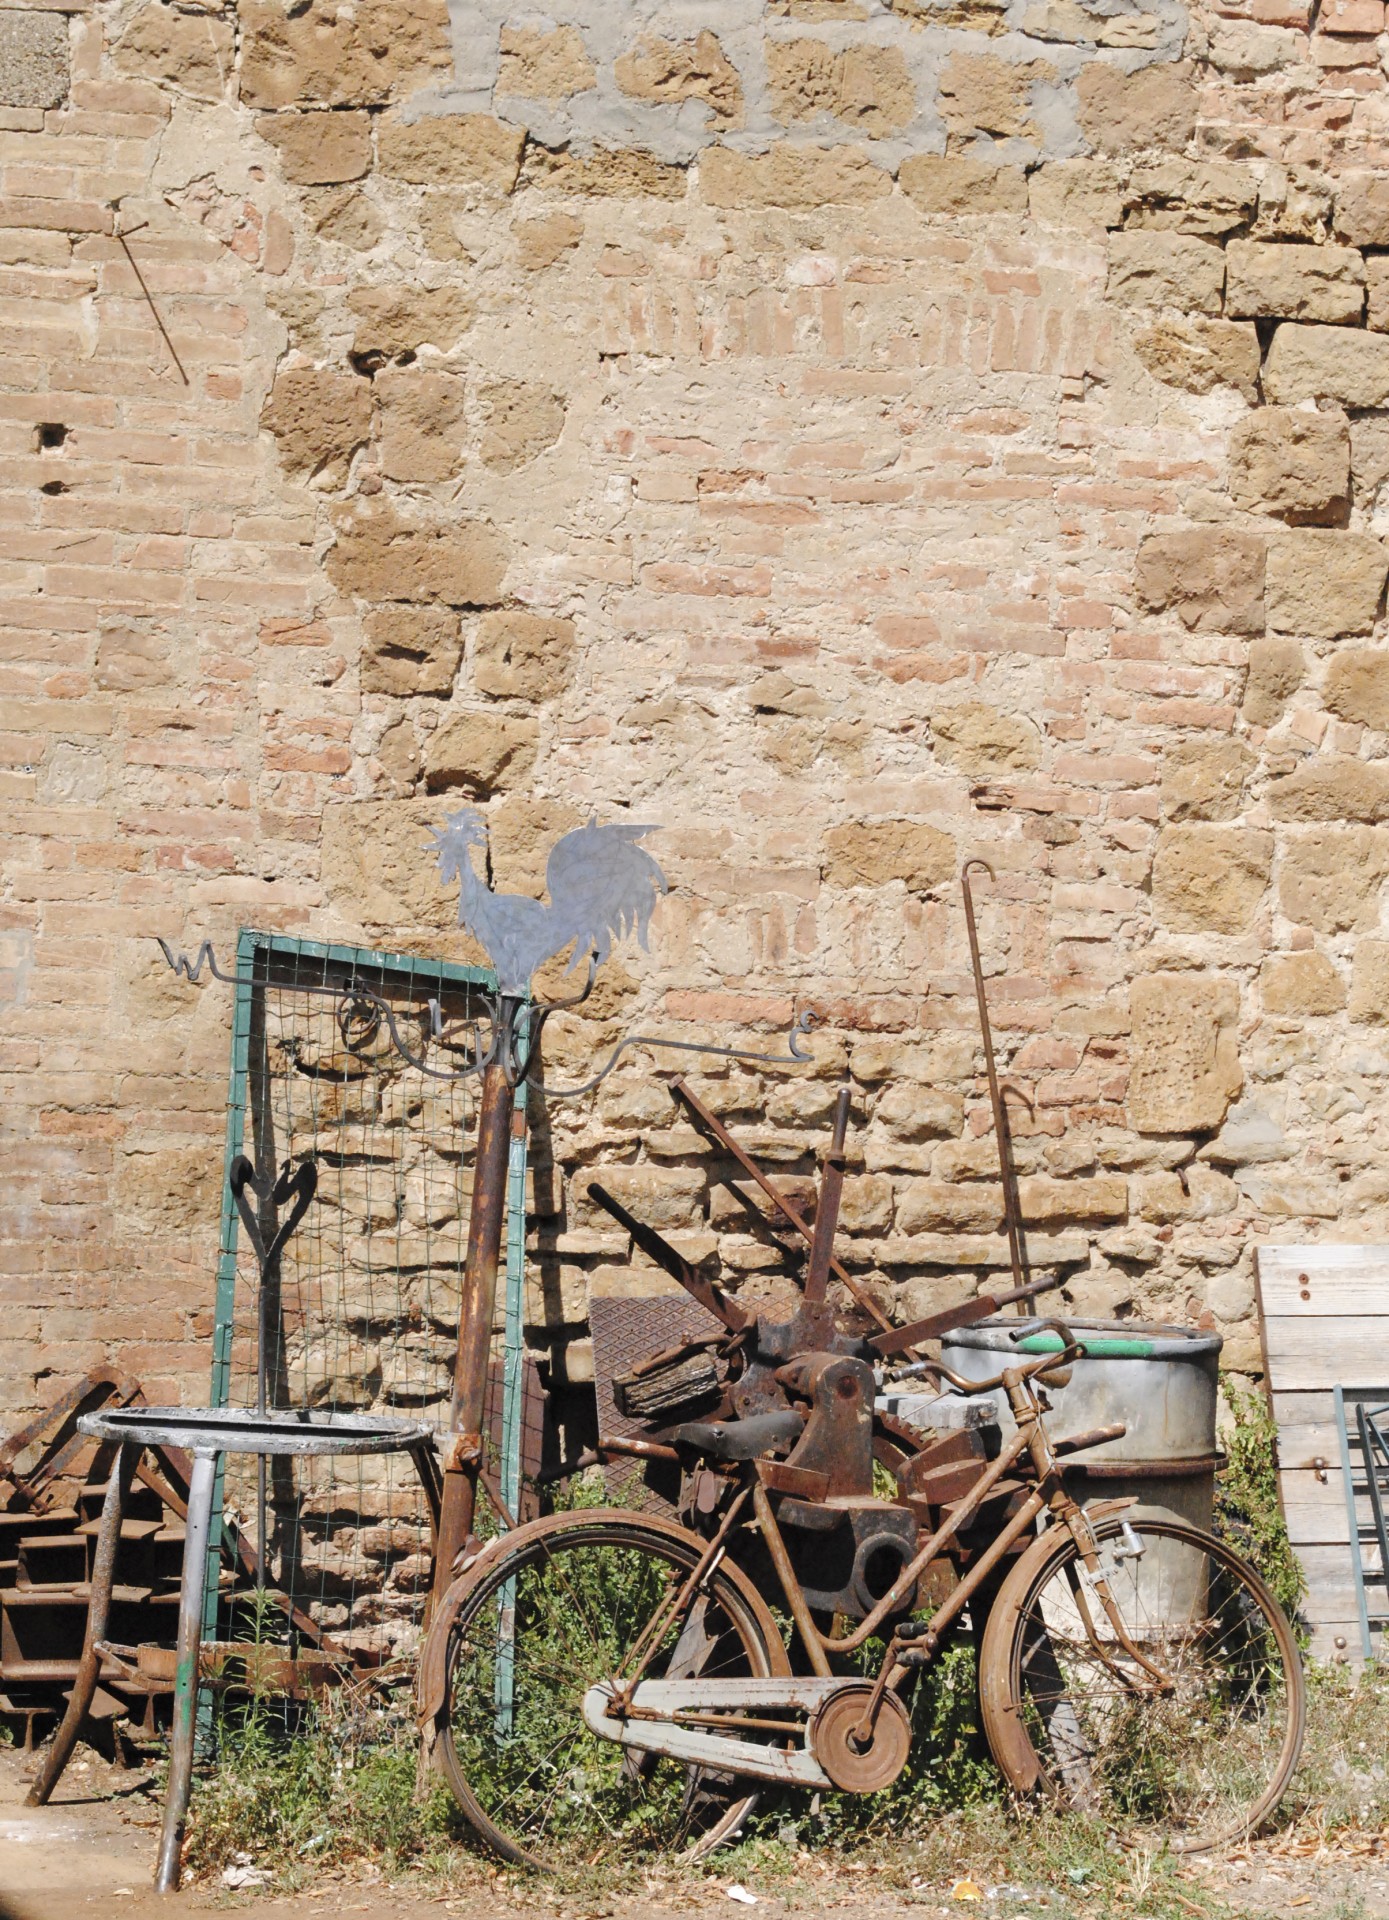 Objects accumulated in a courtyard in Tuscany